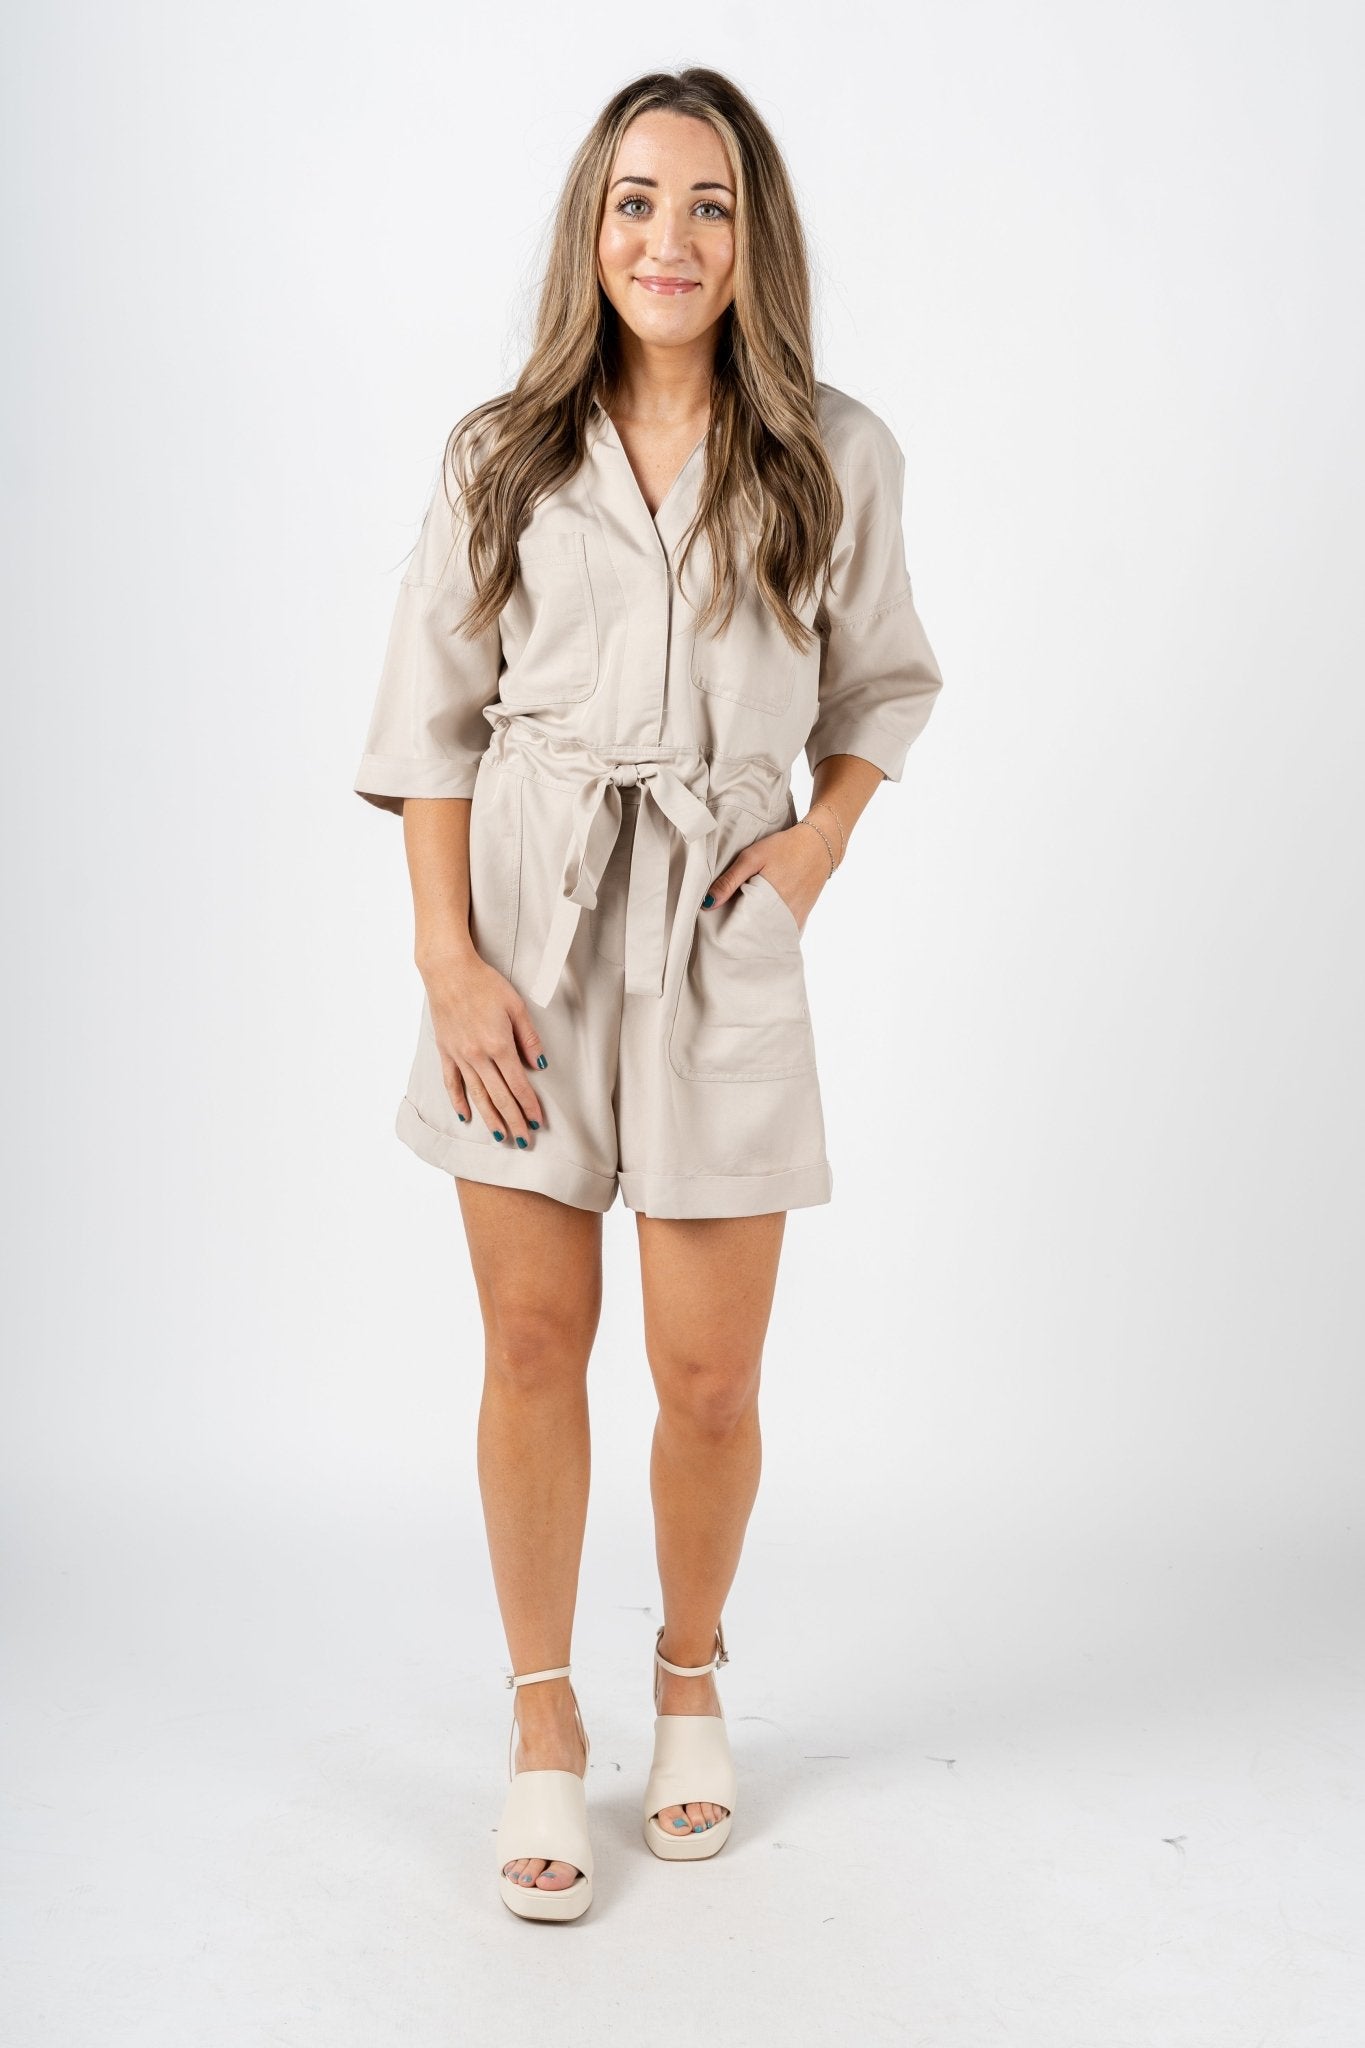 Belted romper taupe - Trendy Romper - Fashion Rompers & Pantsuits at Lush Fashion Lounge Boutique in Oklahoma City